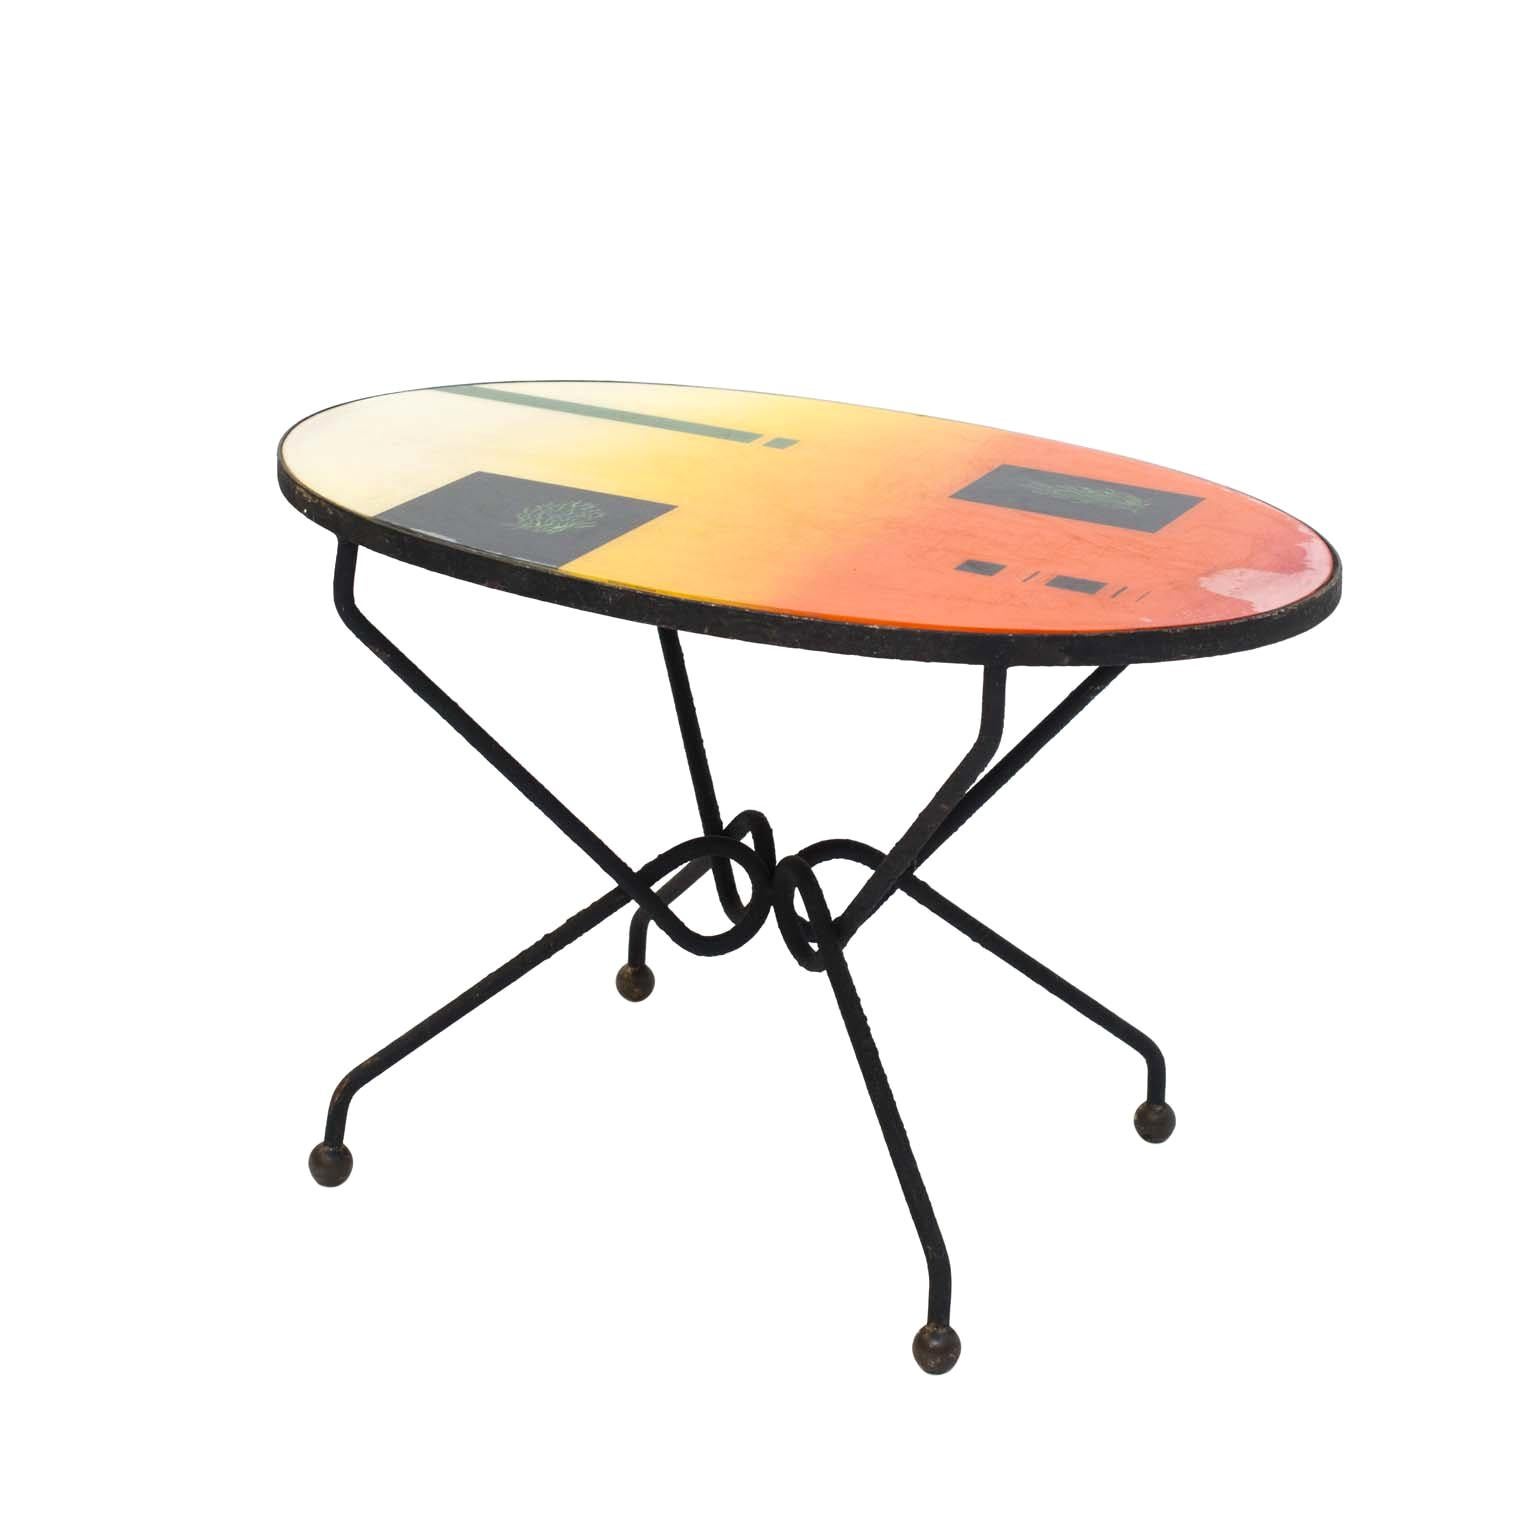 Midcentury Brazilian Side Table with Colorful Graphics, 1970s